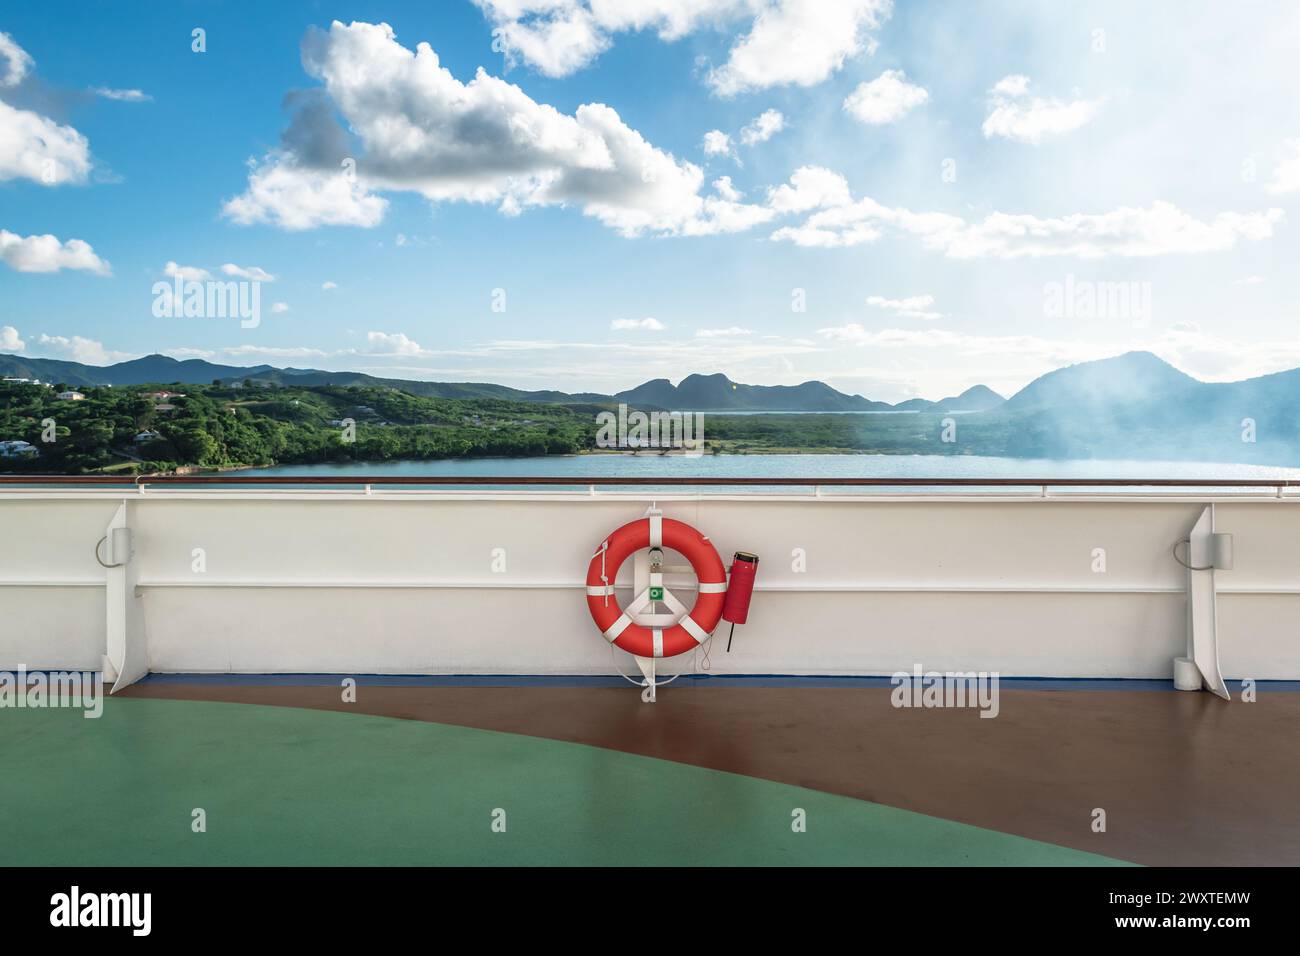 Safety railing and buoy of cruise ship in Antigua, Caribbean. Stock Photo